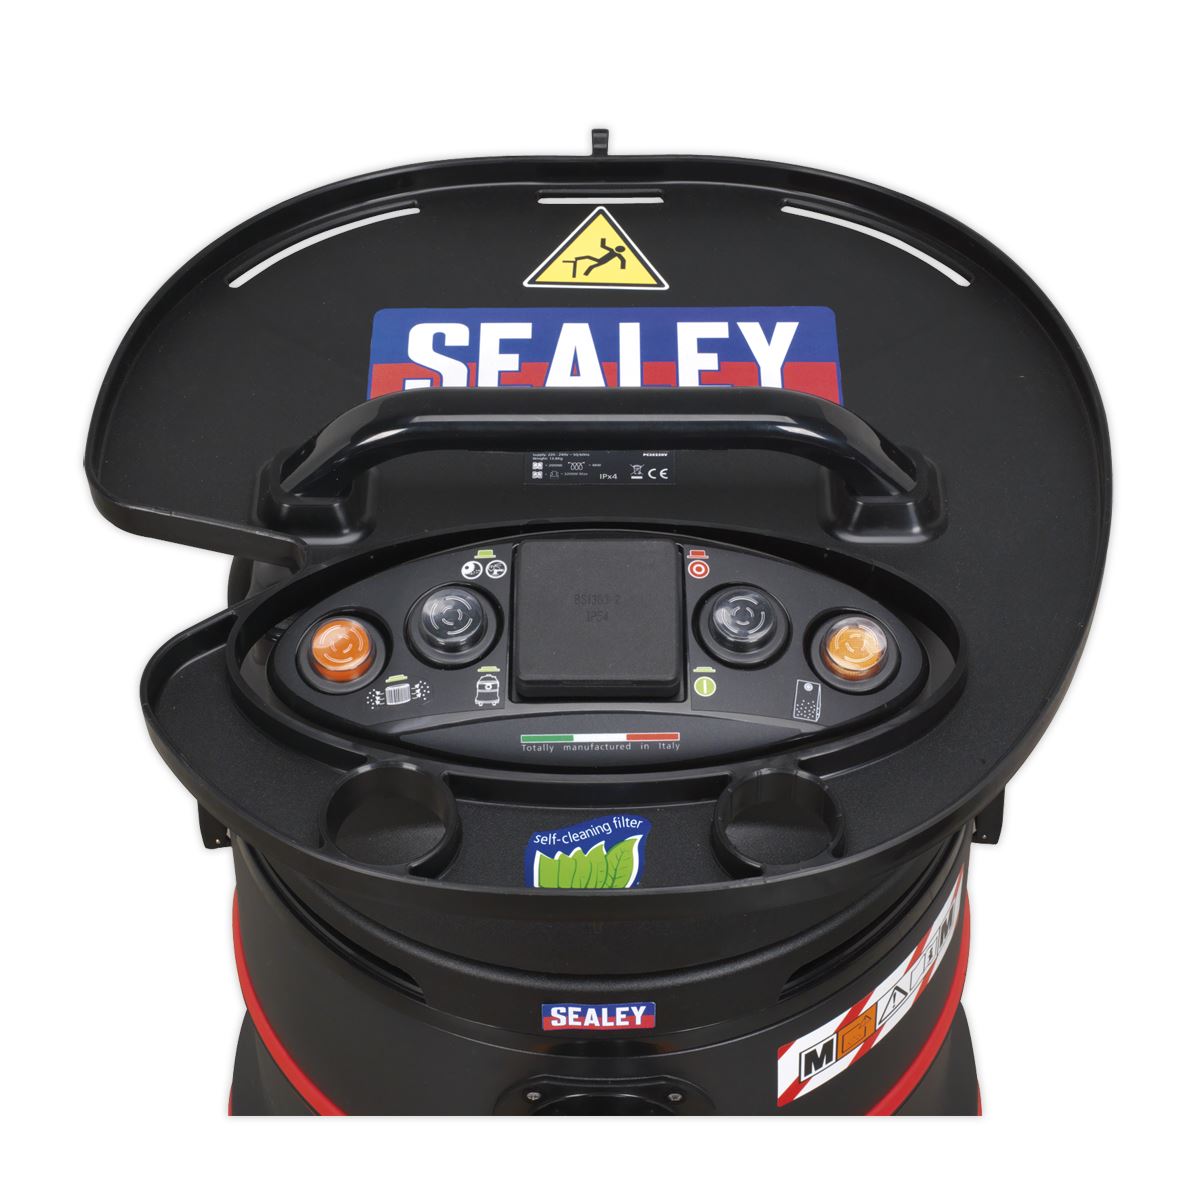 Sealey Vacuum Cleaner Industrial Wet/Dry 35L 1200W/230V Plastic Drum M Class Filtration Self-Clean Filter